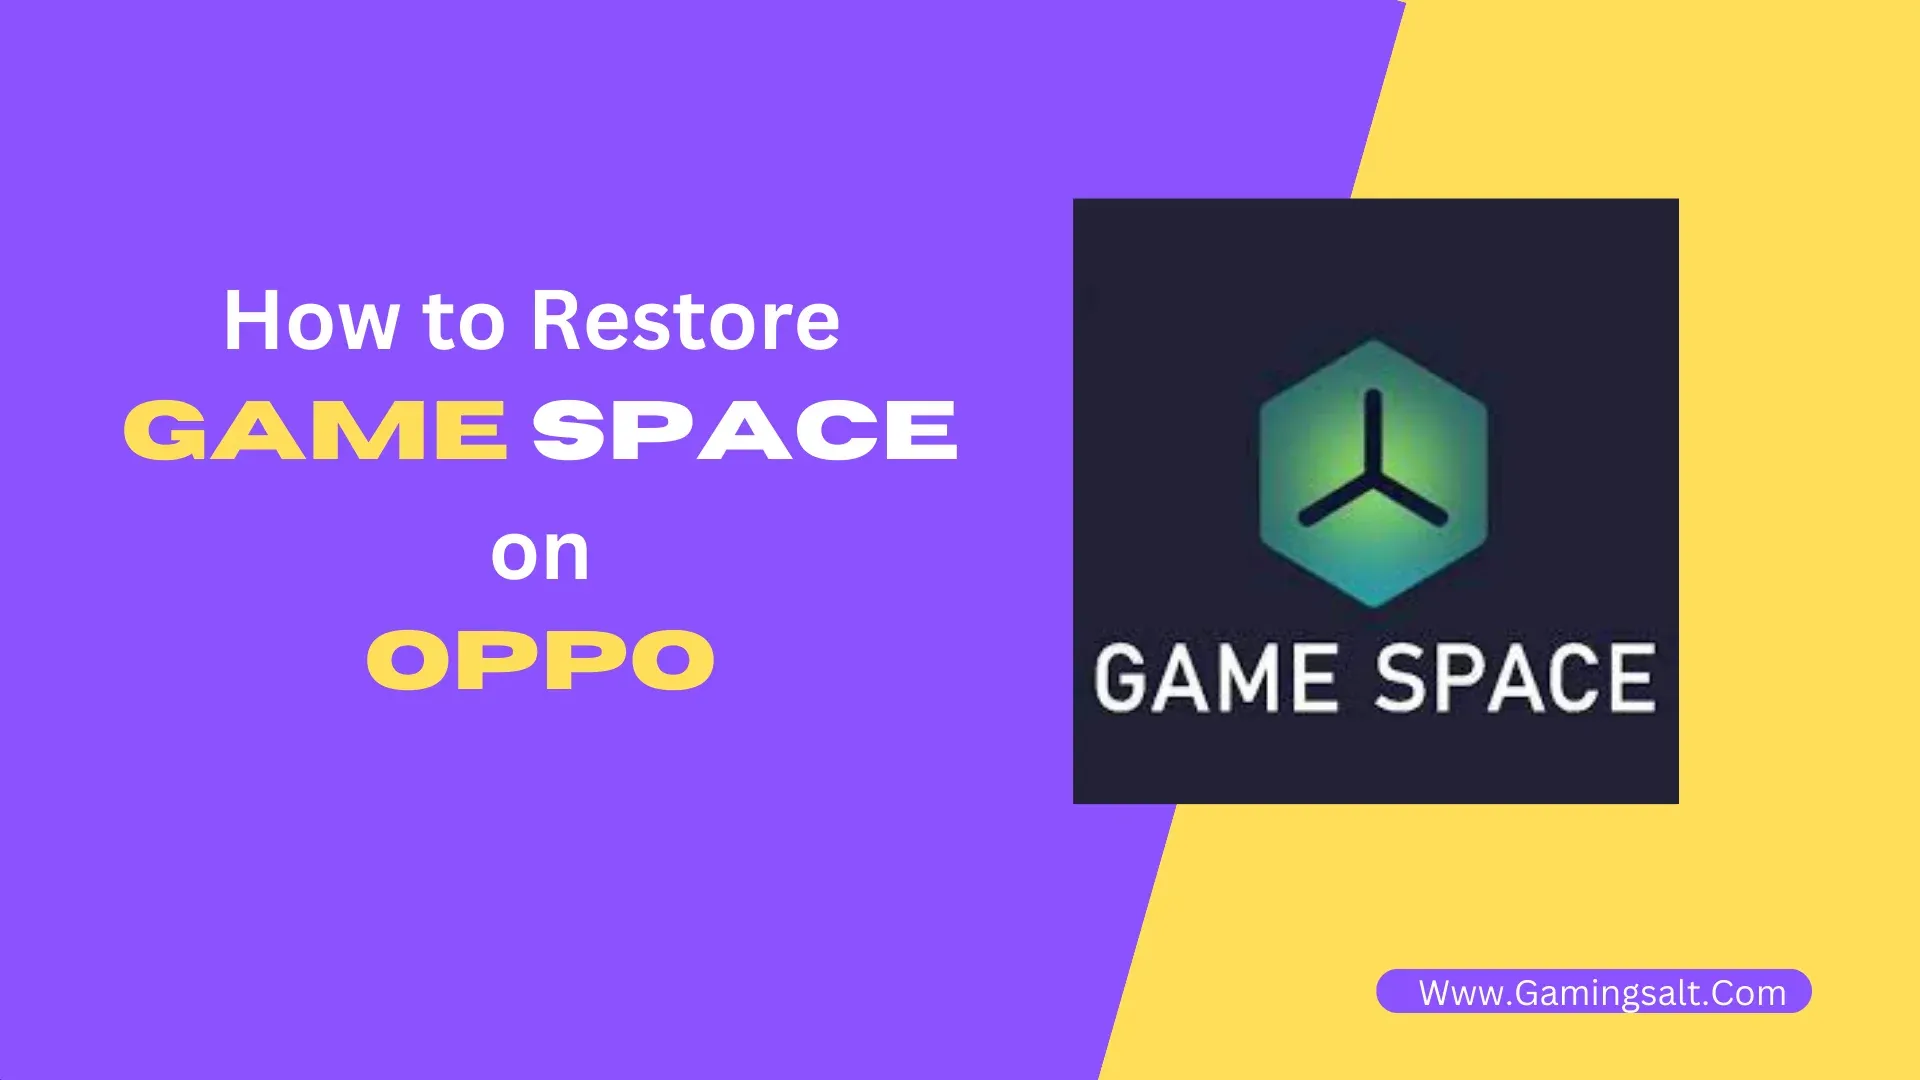 : How to Restore Game Space on Oppo